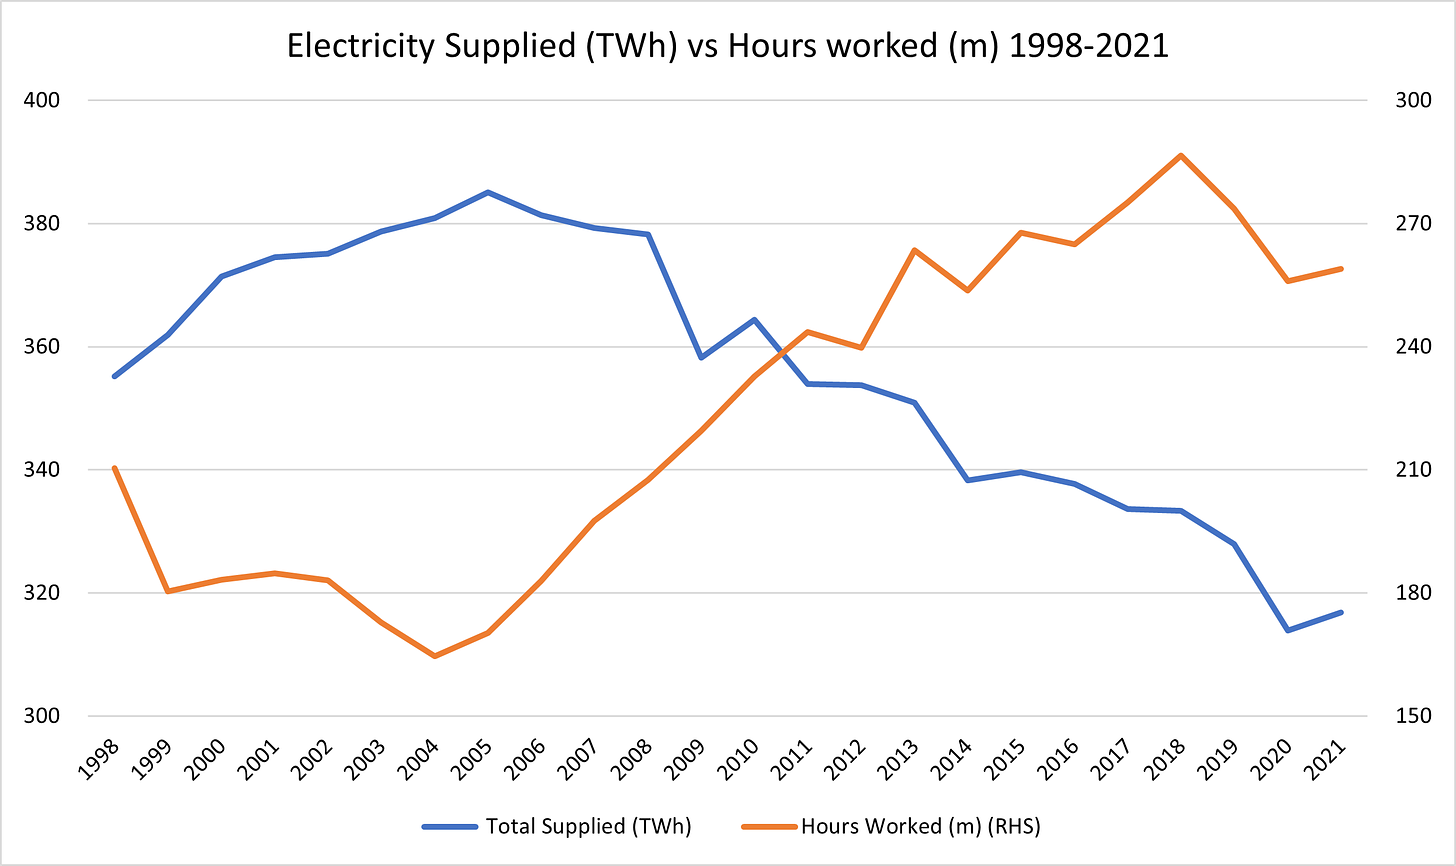 Falling output from UK Electricity Sector with rising hours worked